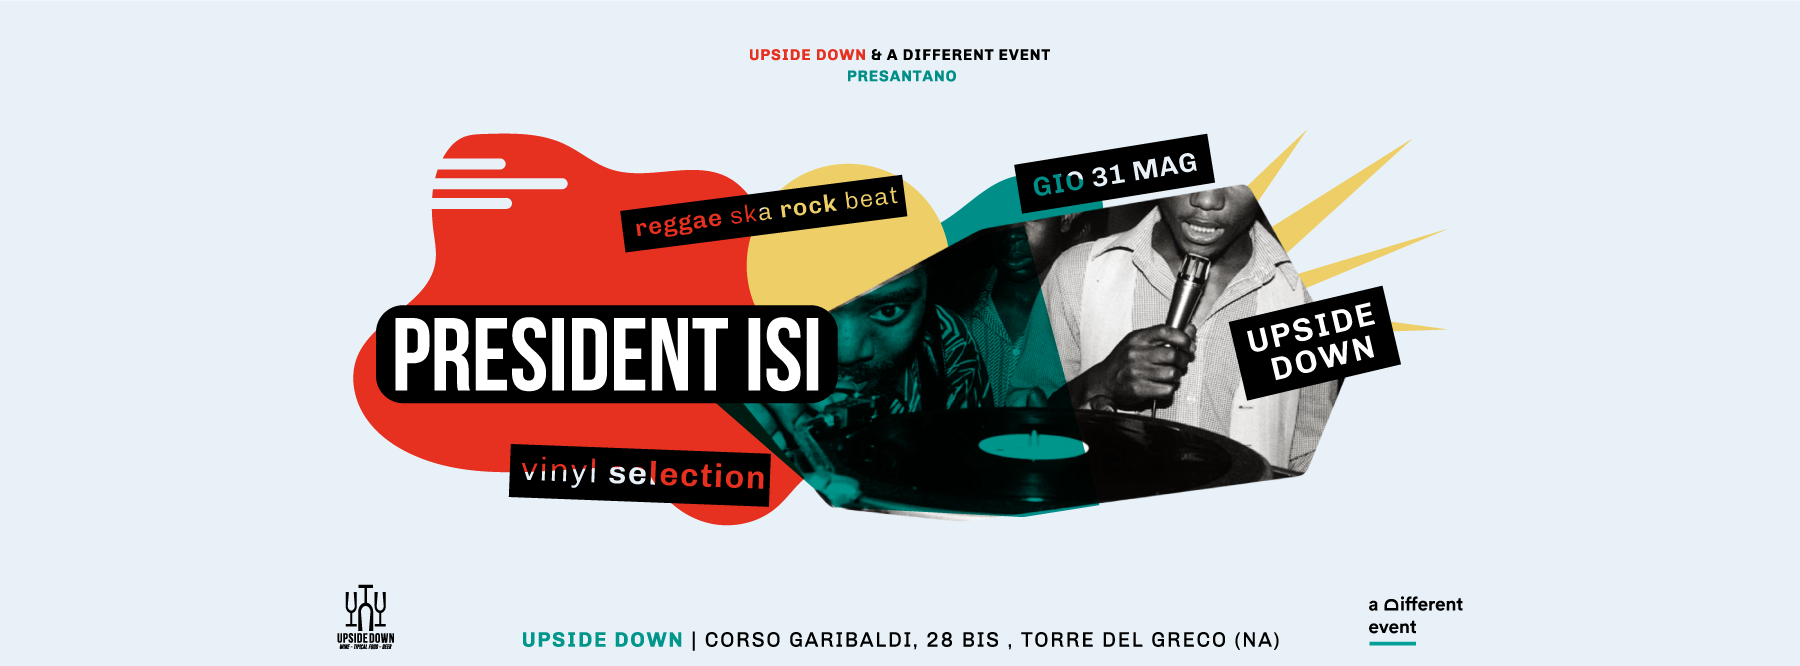 Giovedì 31 Maggio 2018 - President Isi - Vinyl Selection @ Upside Down (T.d.G.-Na)